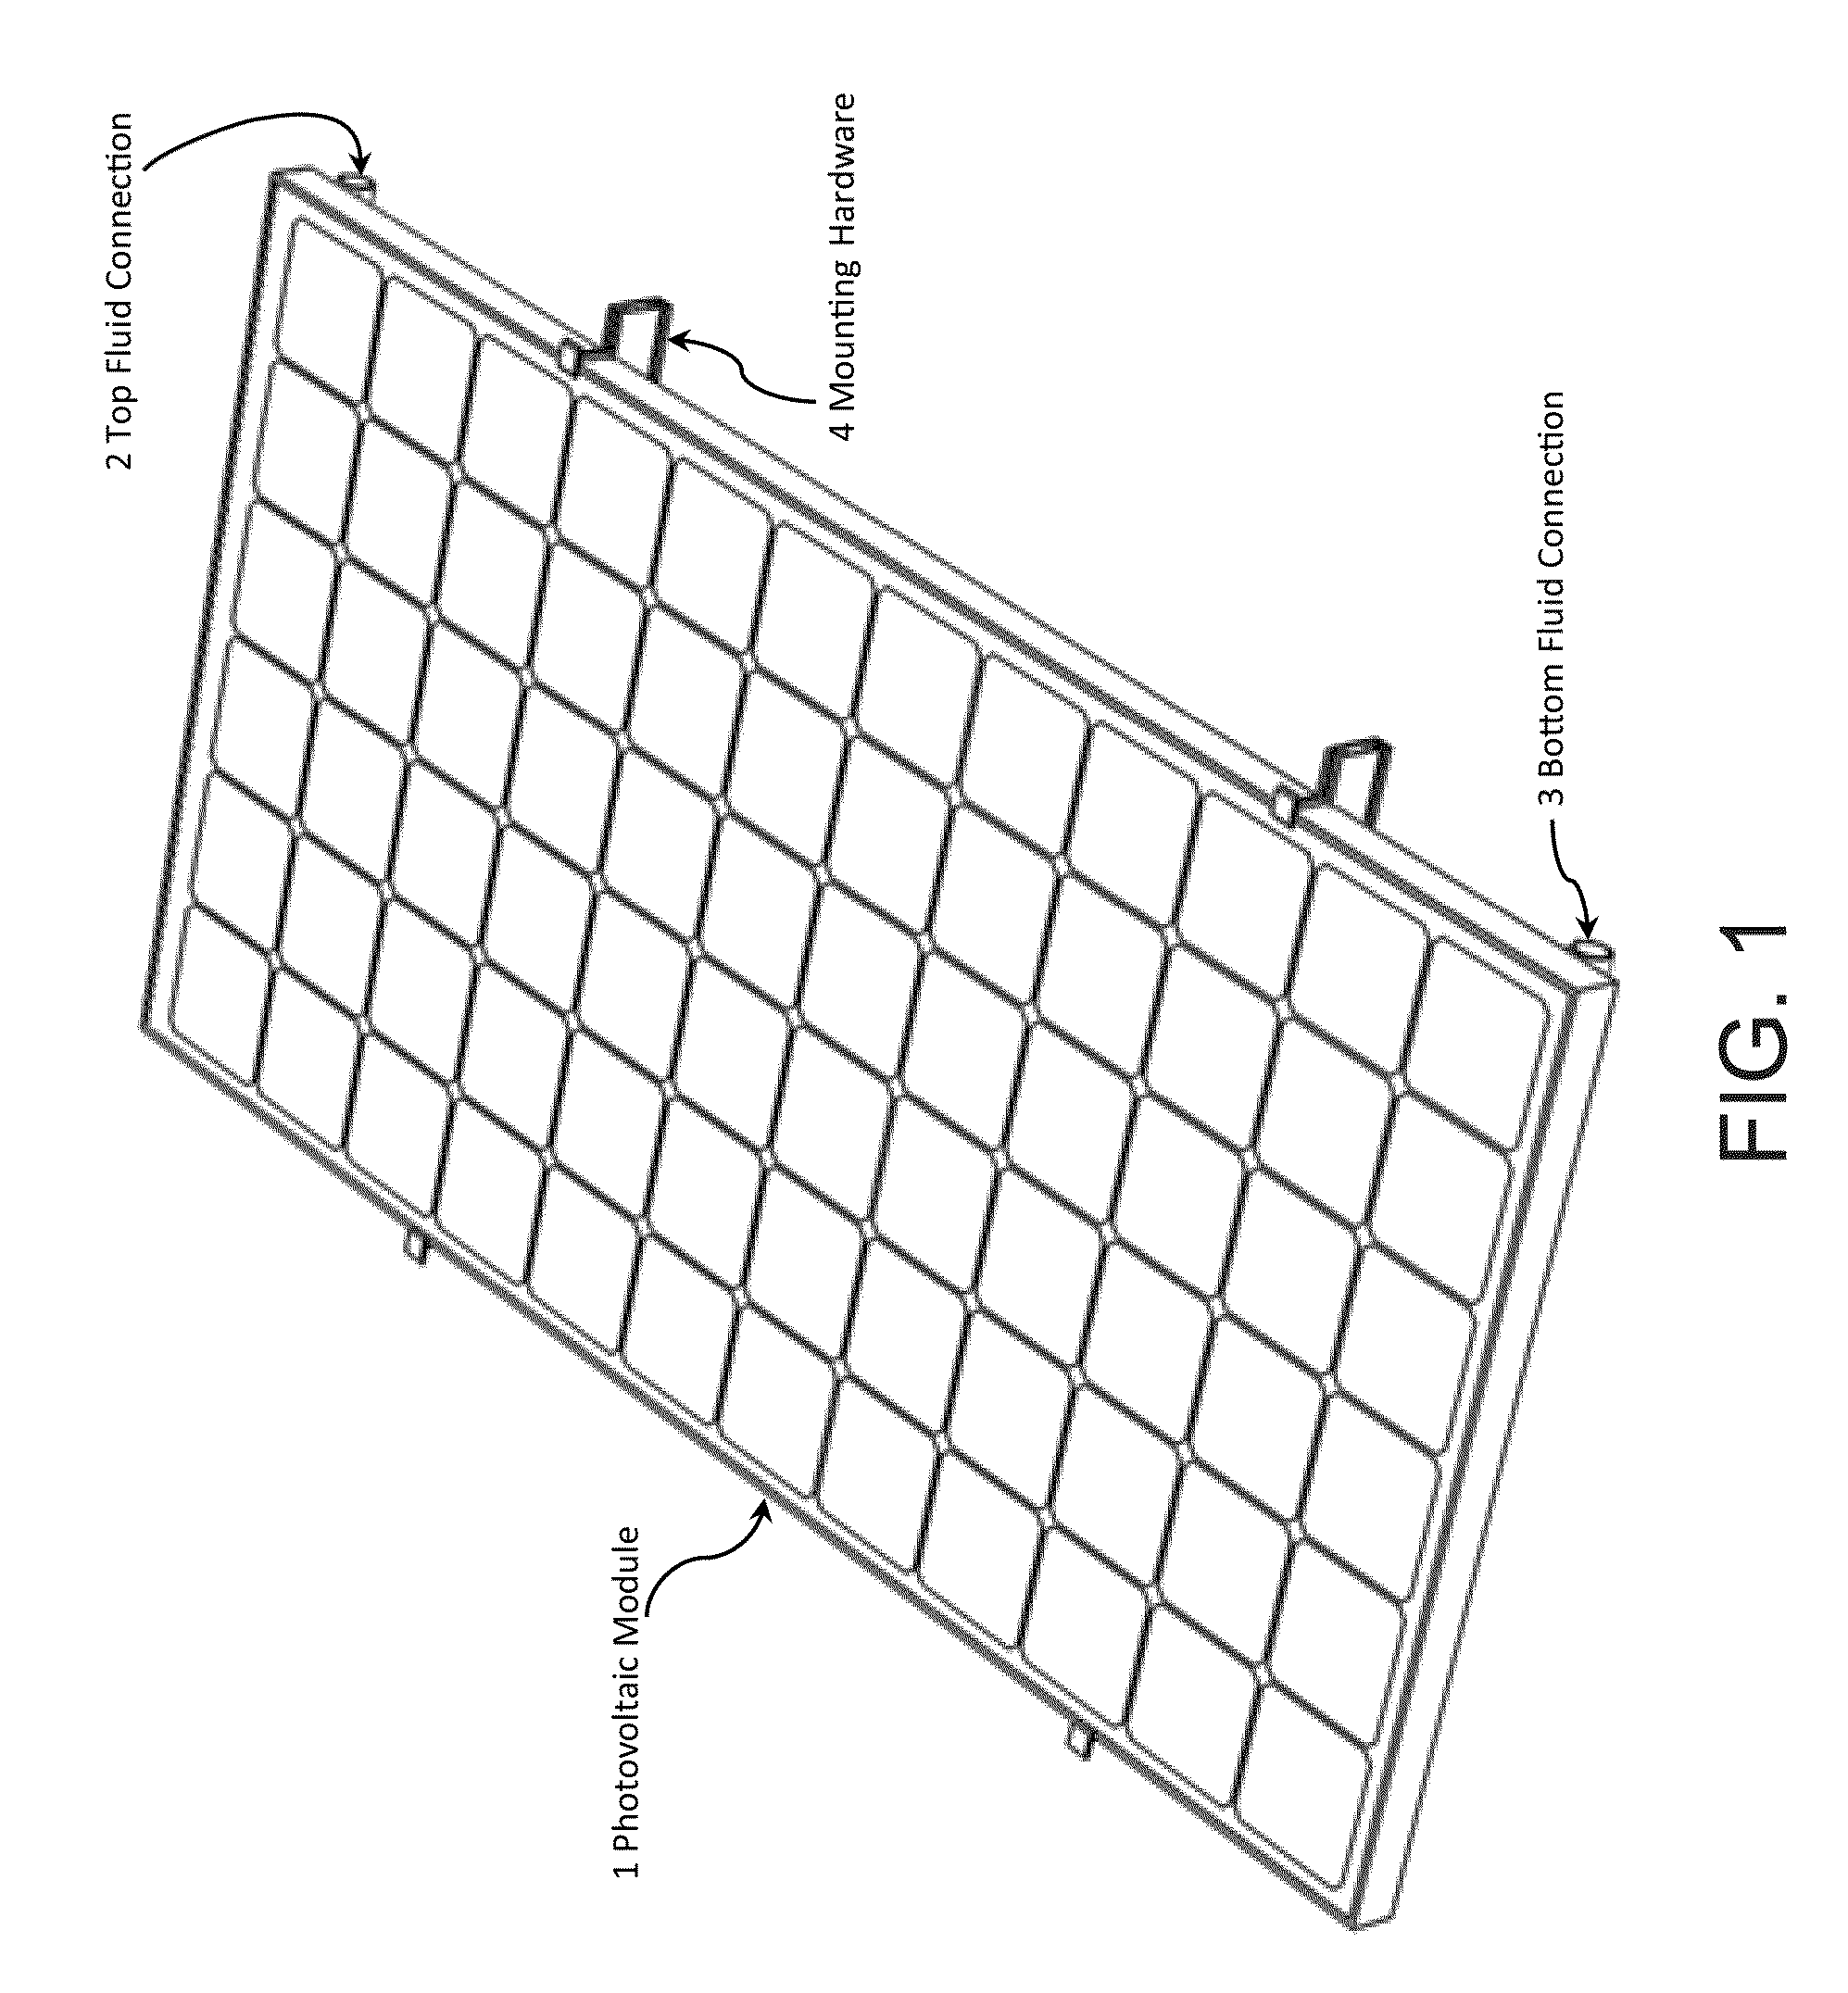 Fluid cooled integrated photovoltaic module